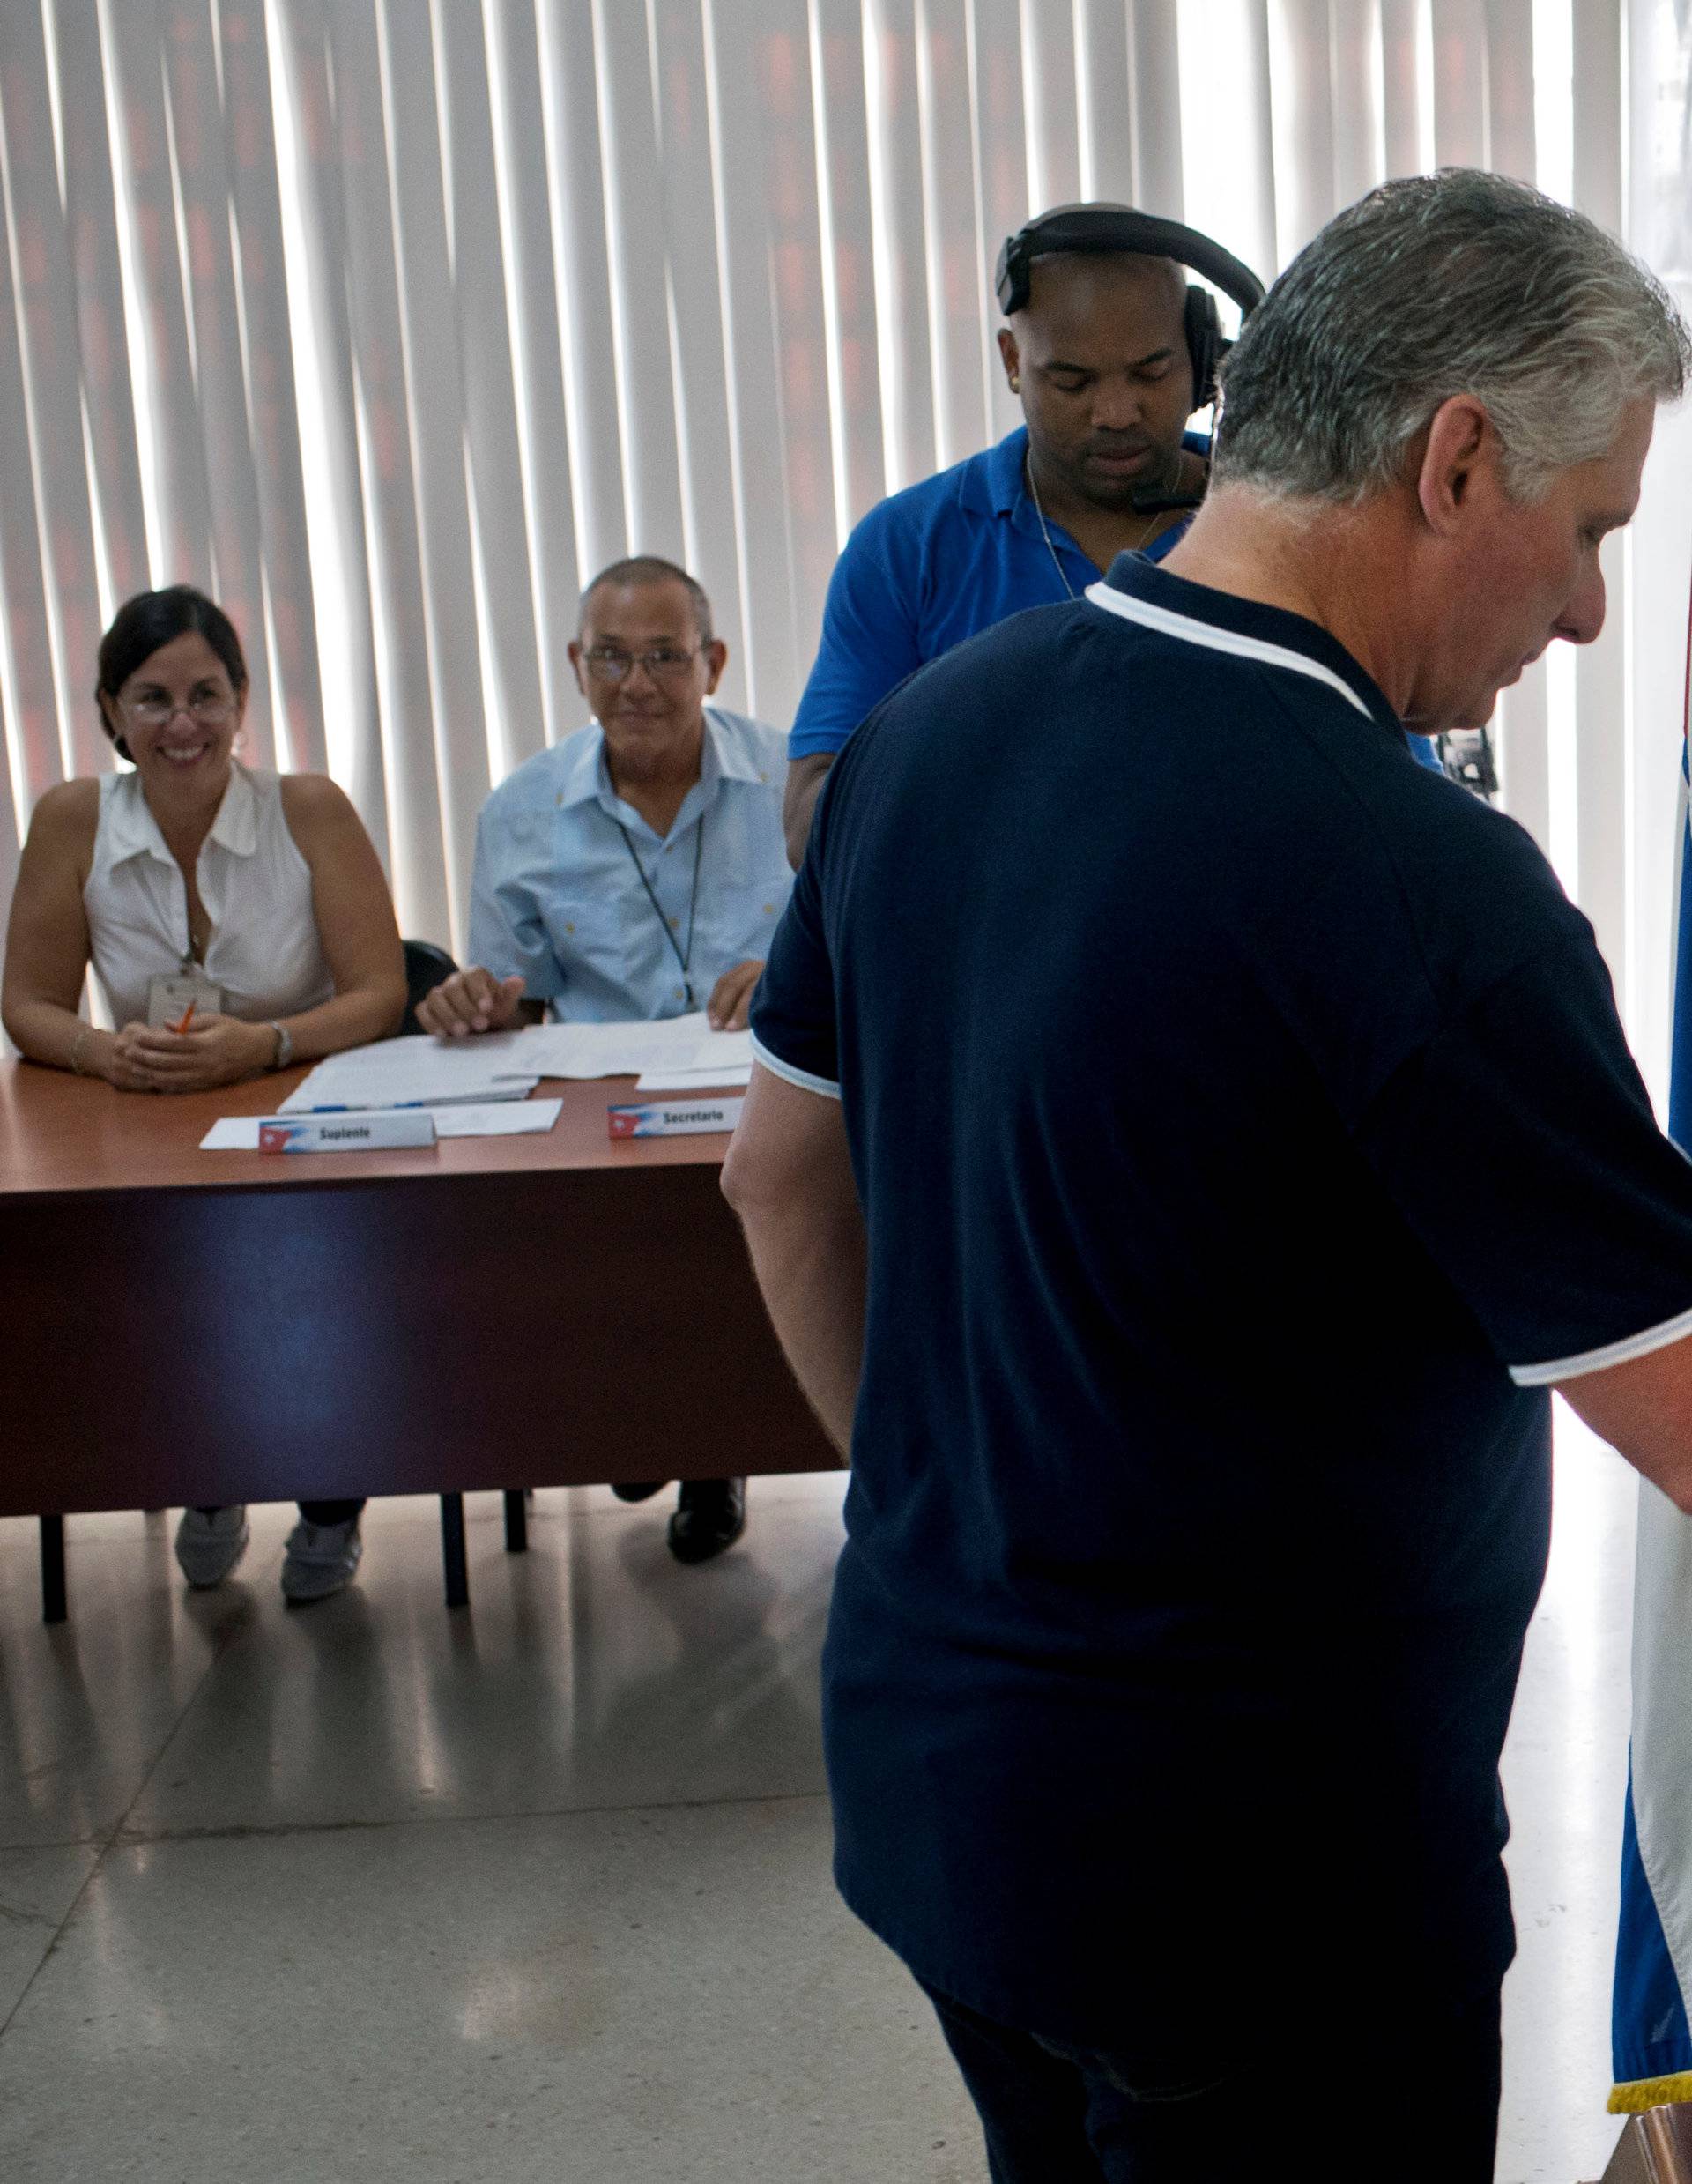 Cuba's President Miguel Diaz-Canel casts his vote during the referendum to approve the constitutional reform in Havana